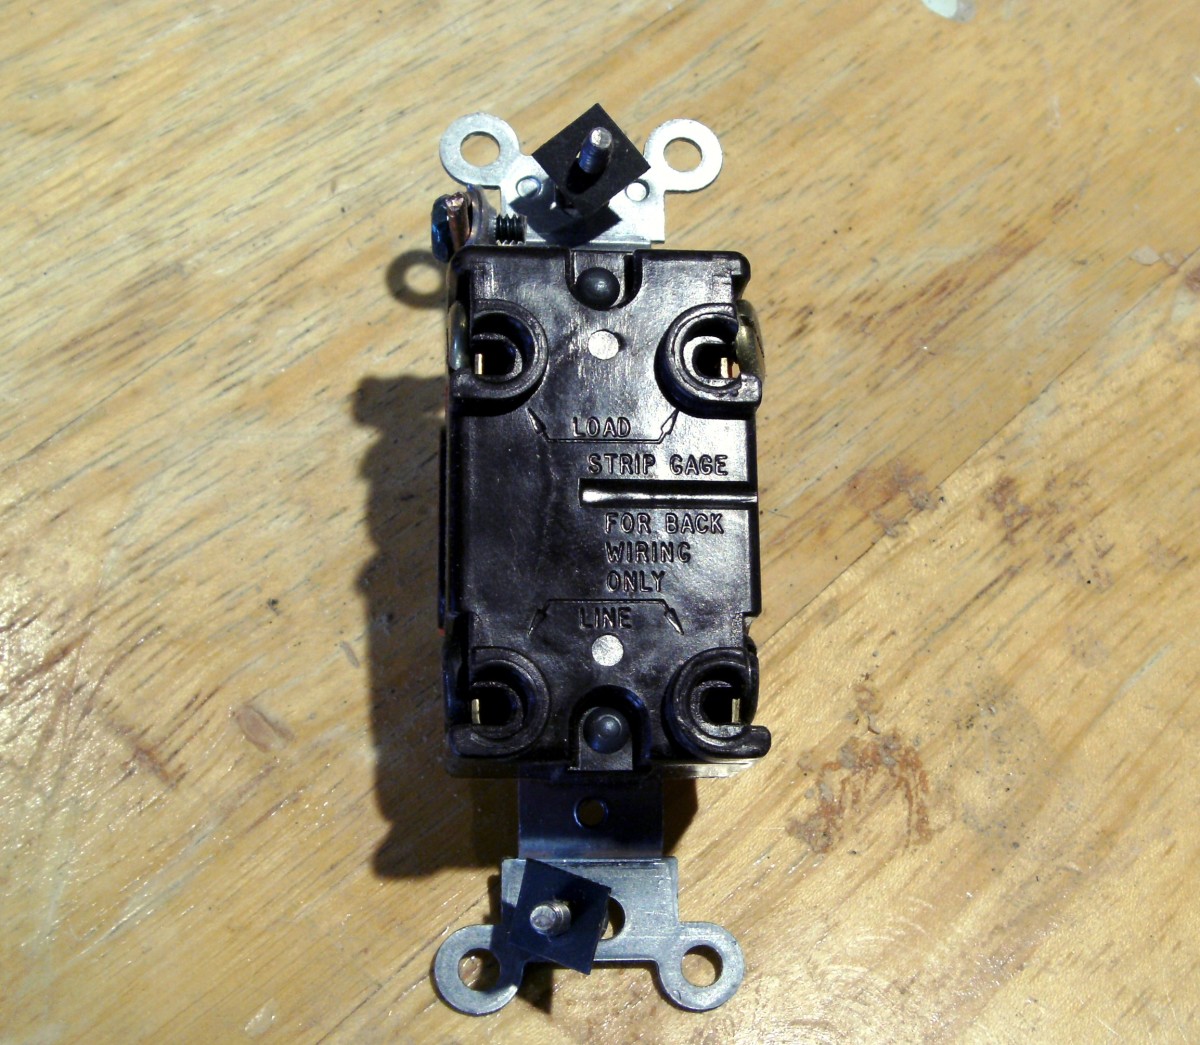 This is the back side of a 4-way switch. There are four places to terminate wire, plus a green screw at the top of the switch for the green or bare ground wire. This switch has screws at the sides as well as the holes in the back.